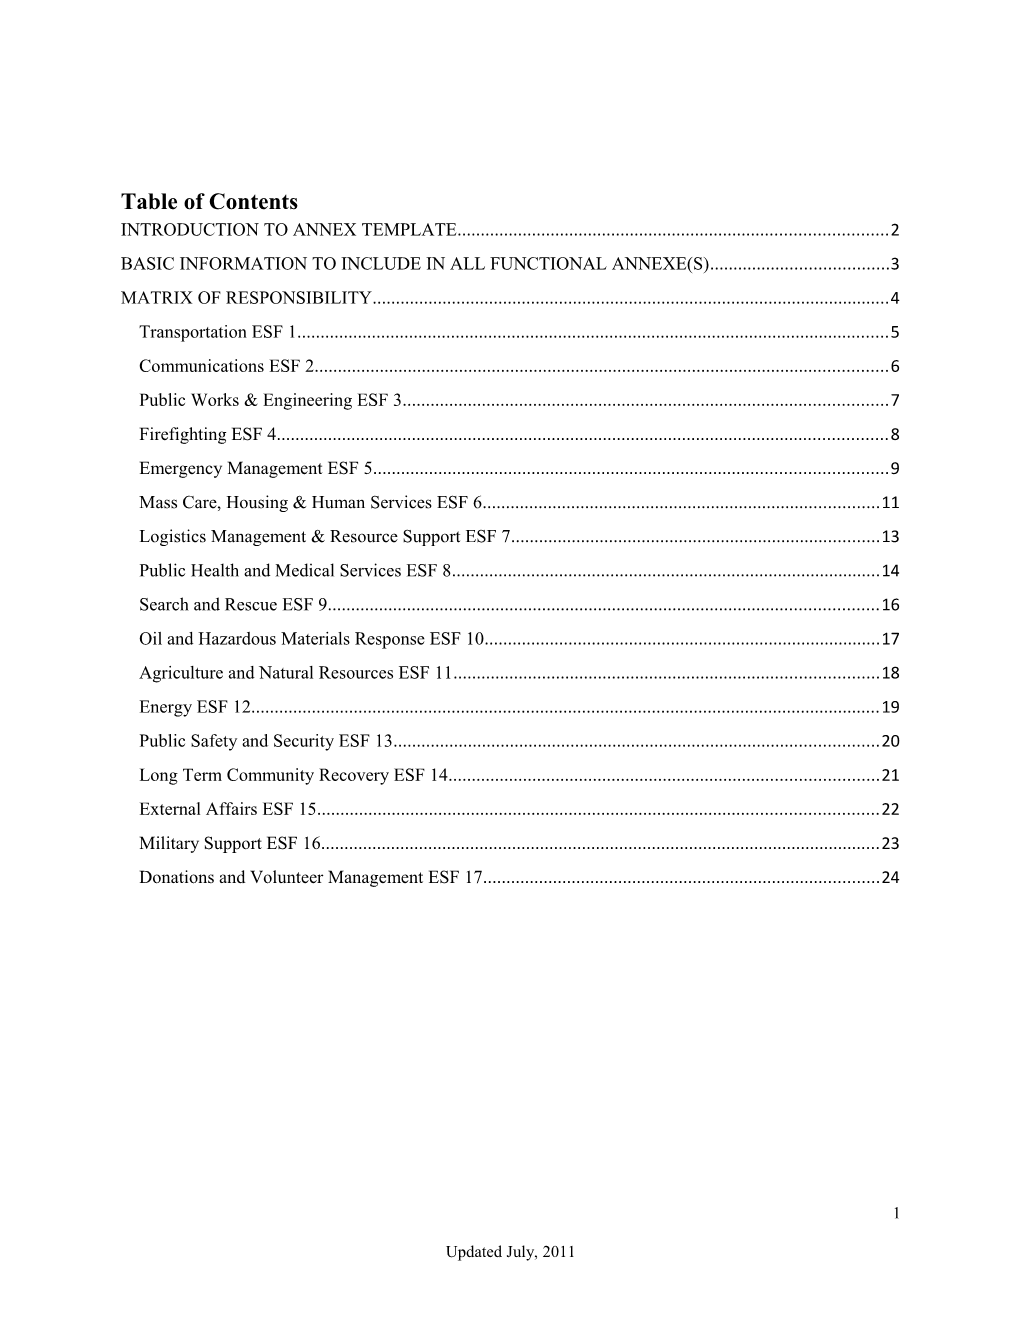 Table of Contents s155